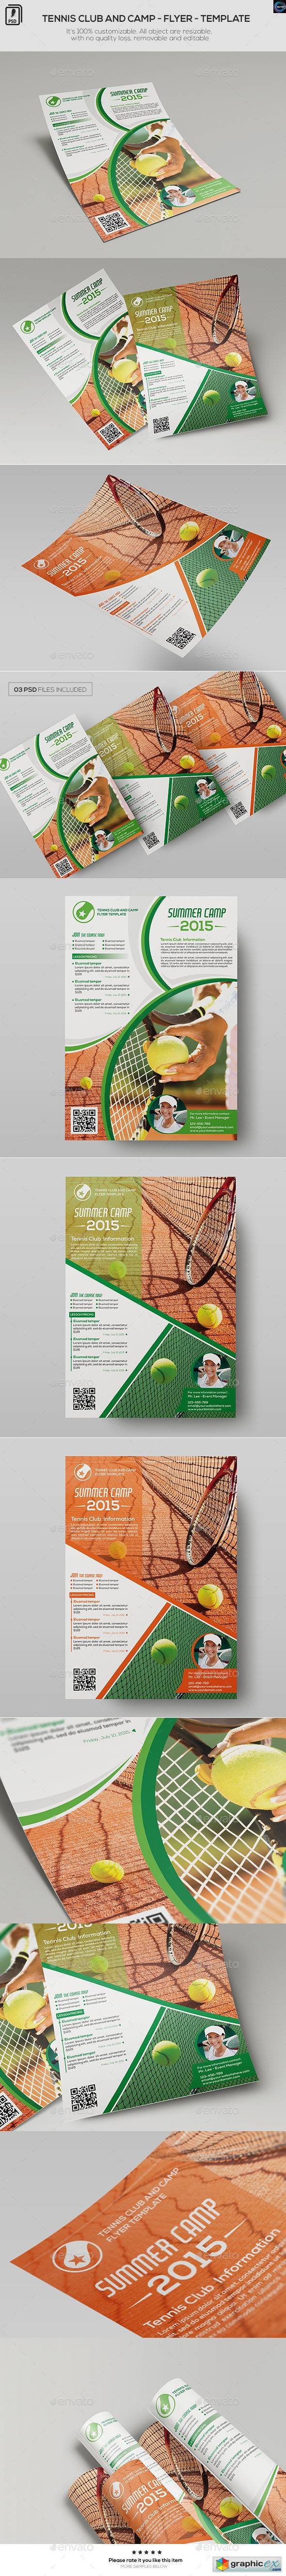 Tennis Club and Camp - Flyer Template